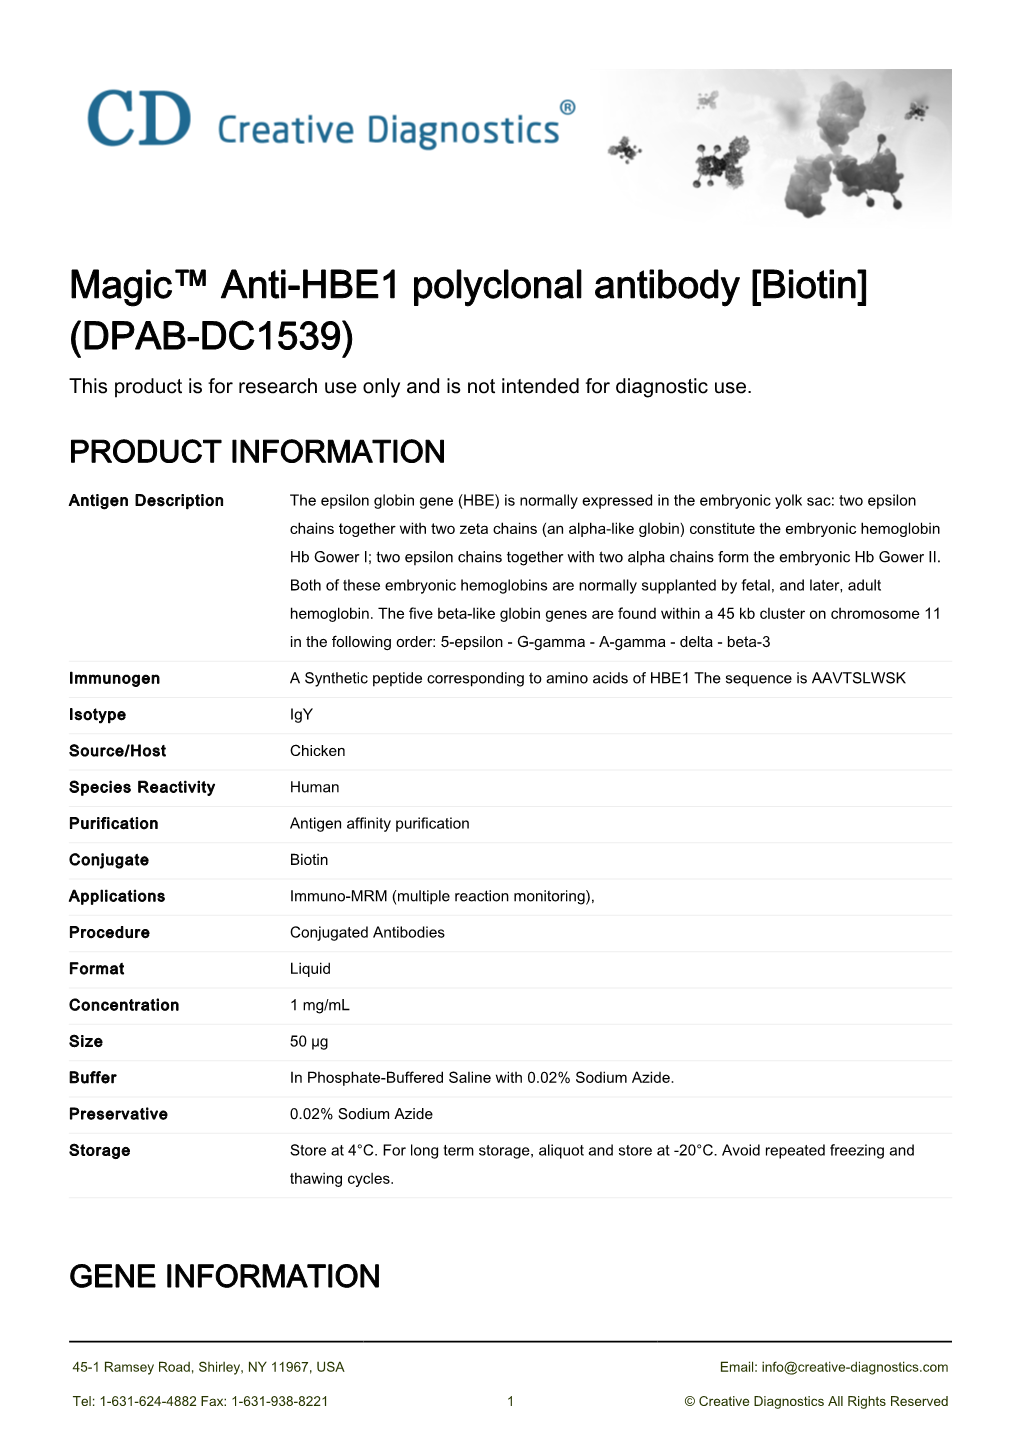 Magic™ Anti-HBE1 Polyclonal Antibody [Biotin] (DPAB-DC1539) This Product Is for Research Use Only and Is Not Intended for Diagnostic Use